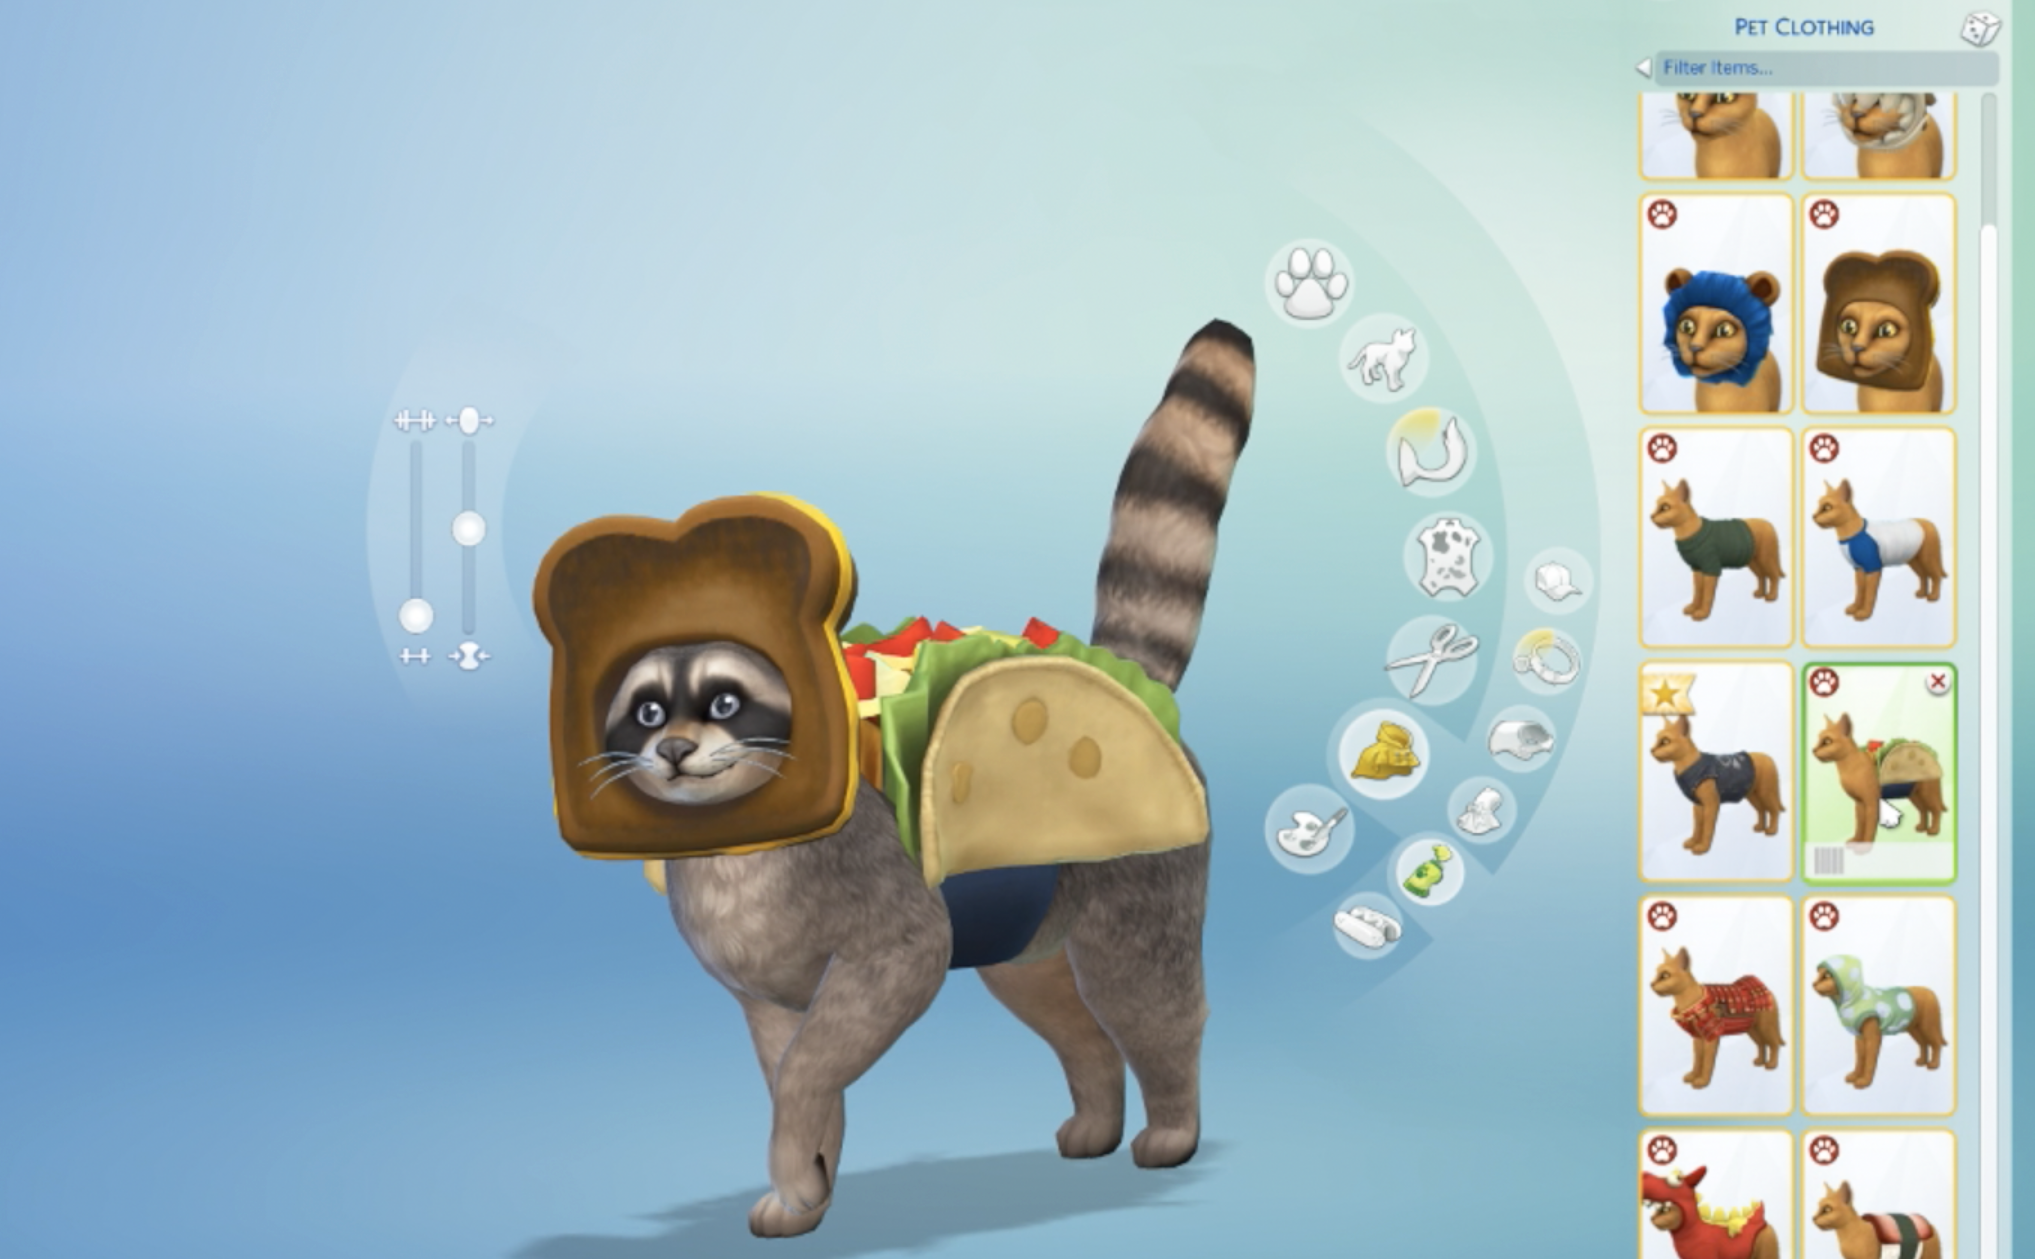 sims 4 cats and dogs free mac